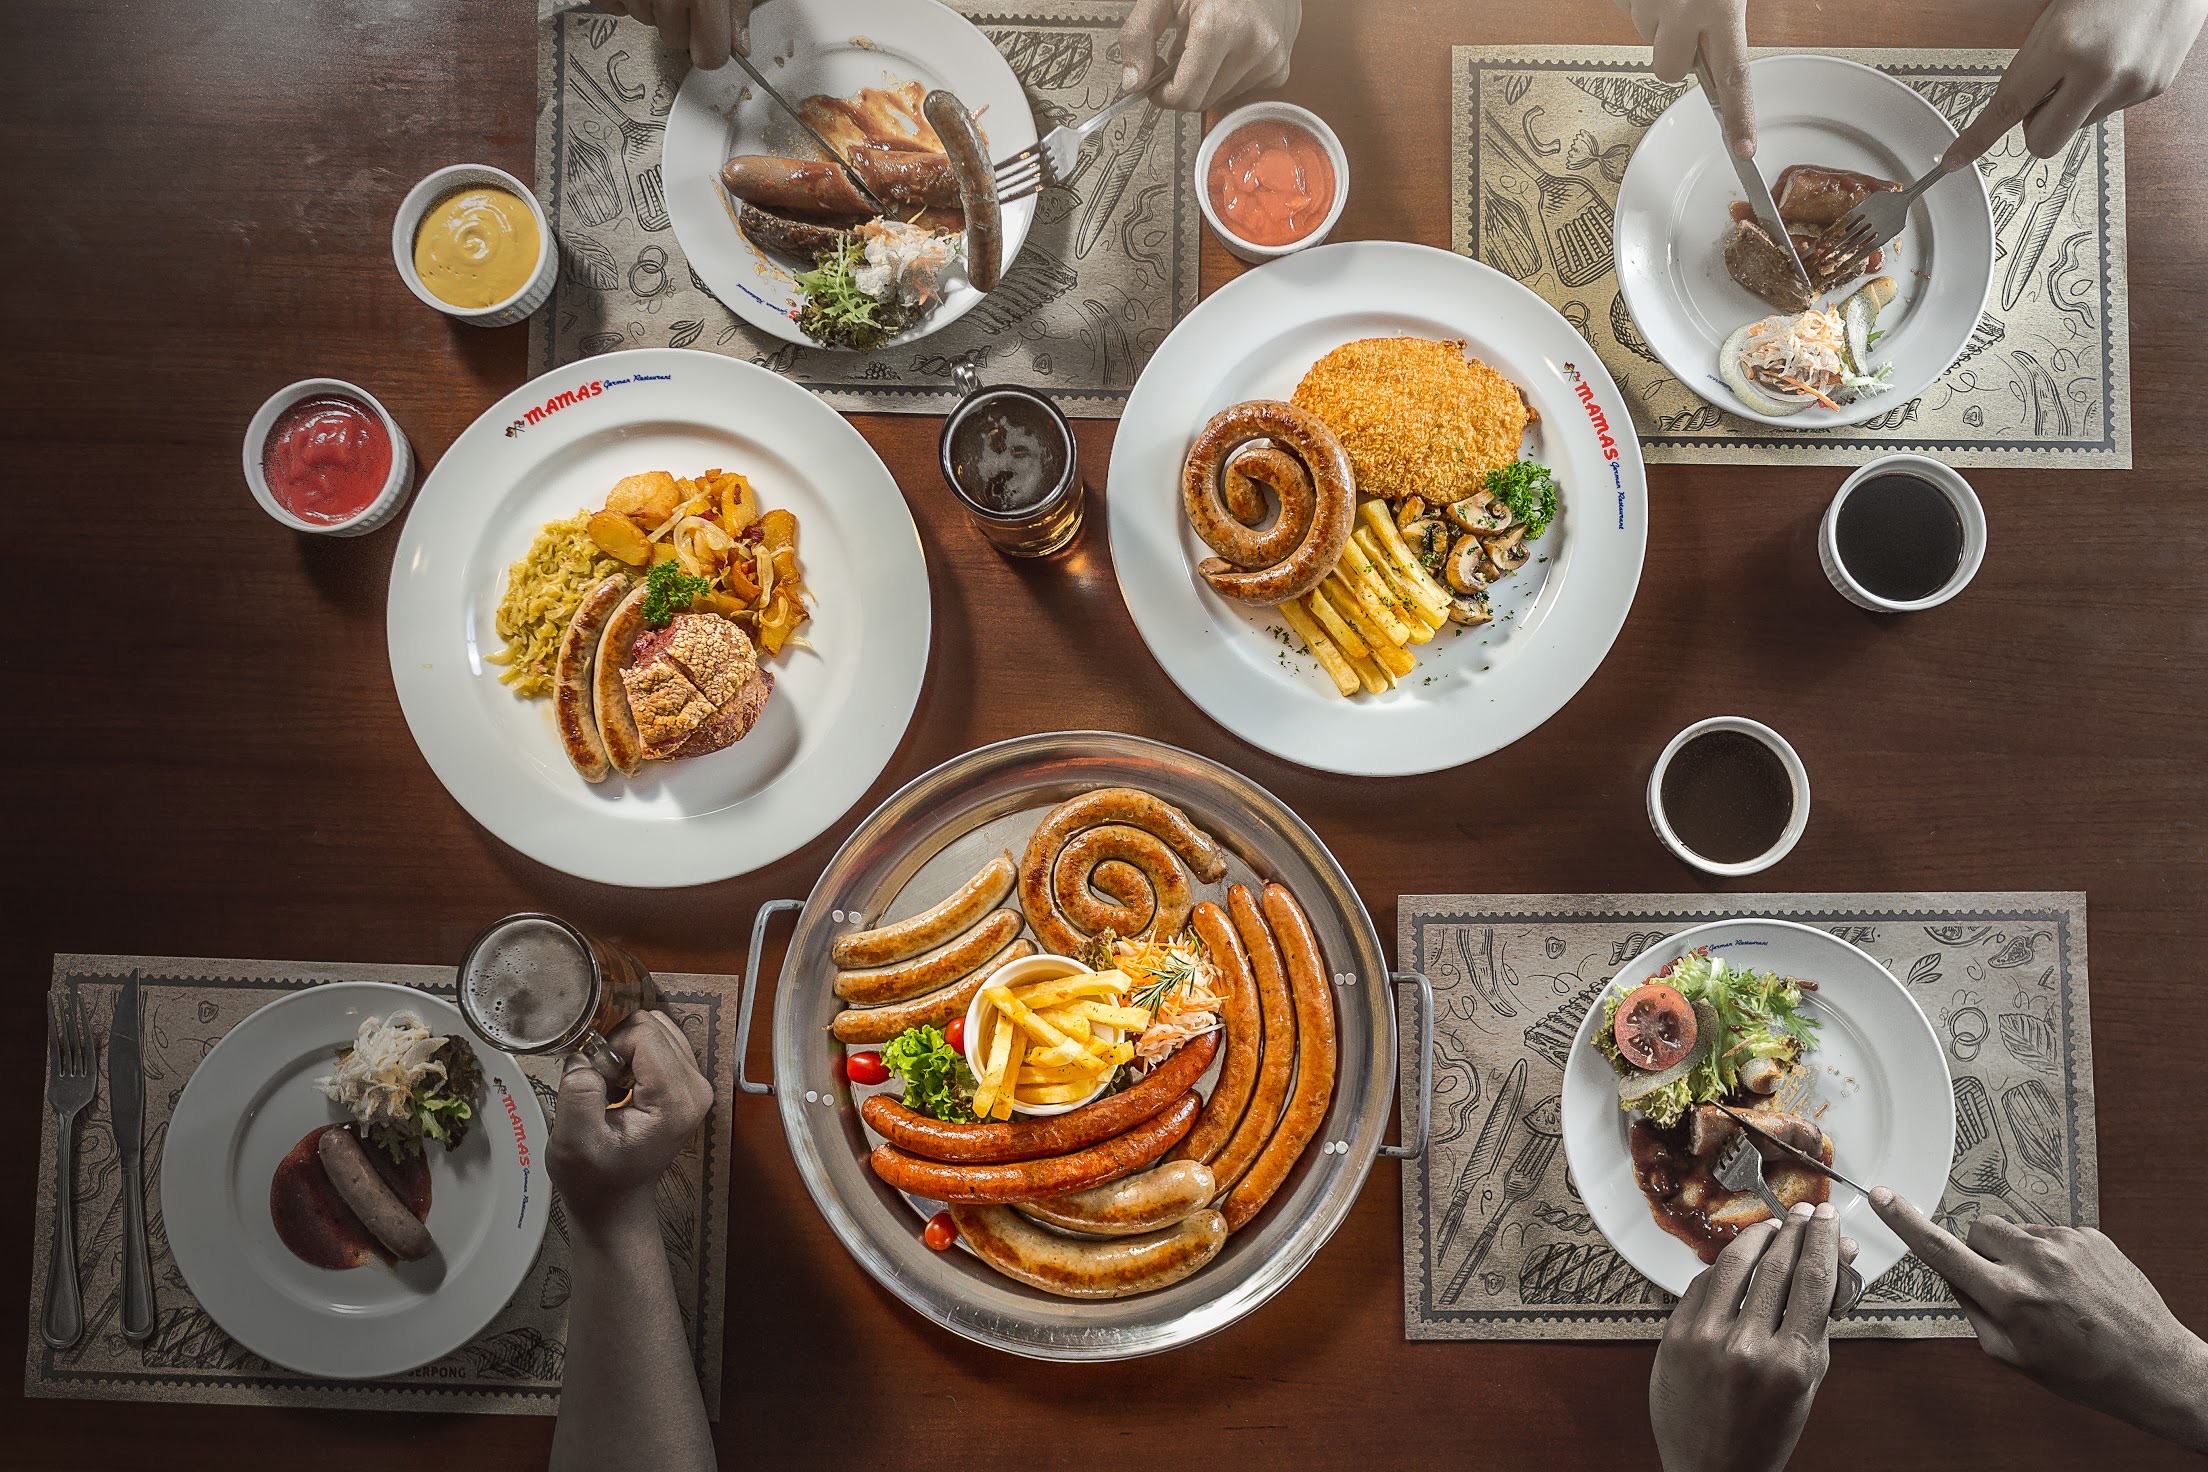 Why Food Photography is A Great Hobby